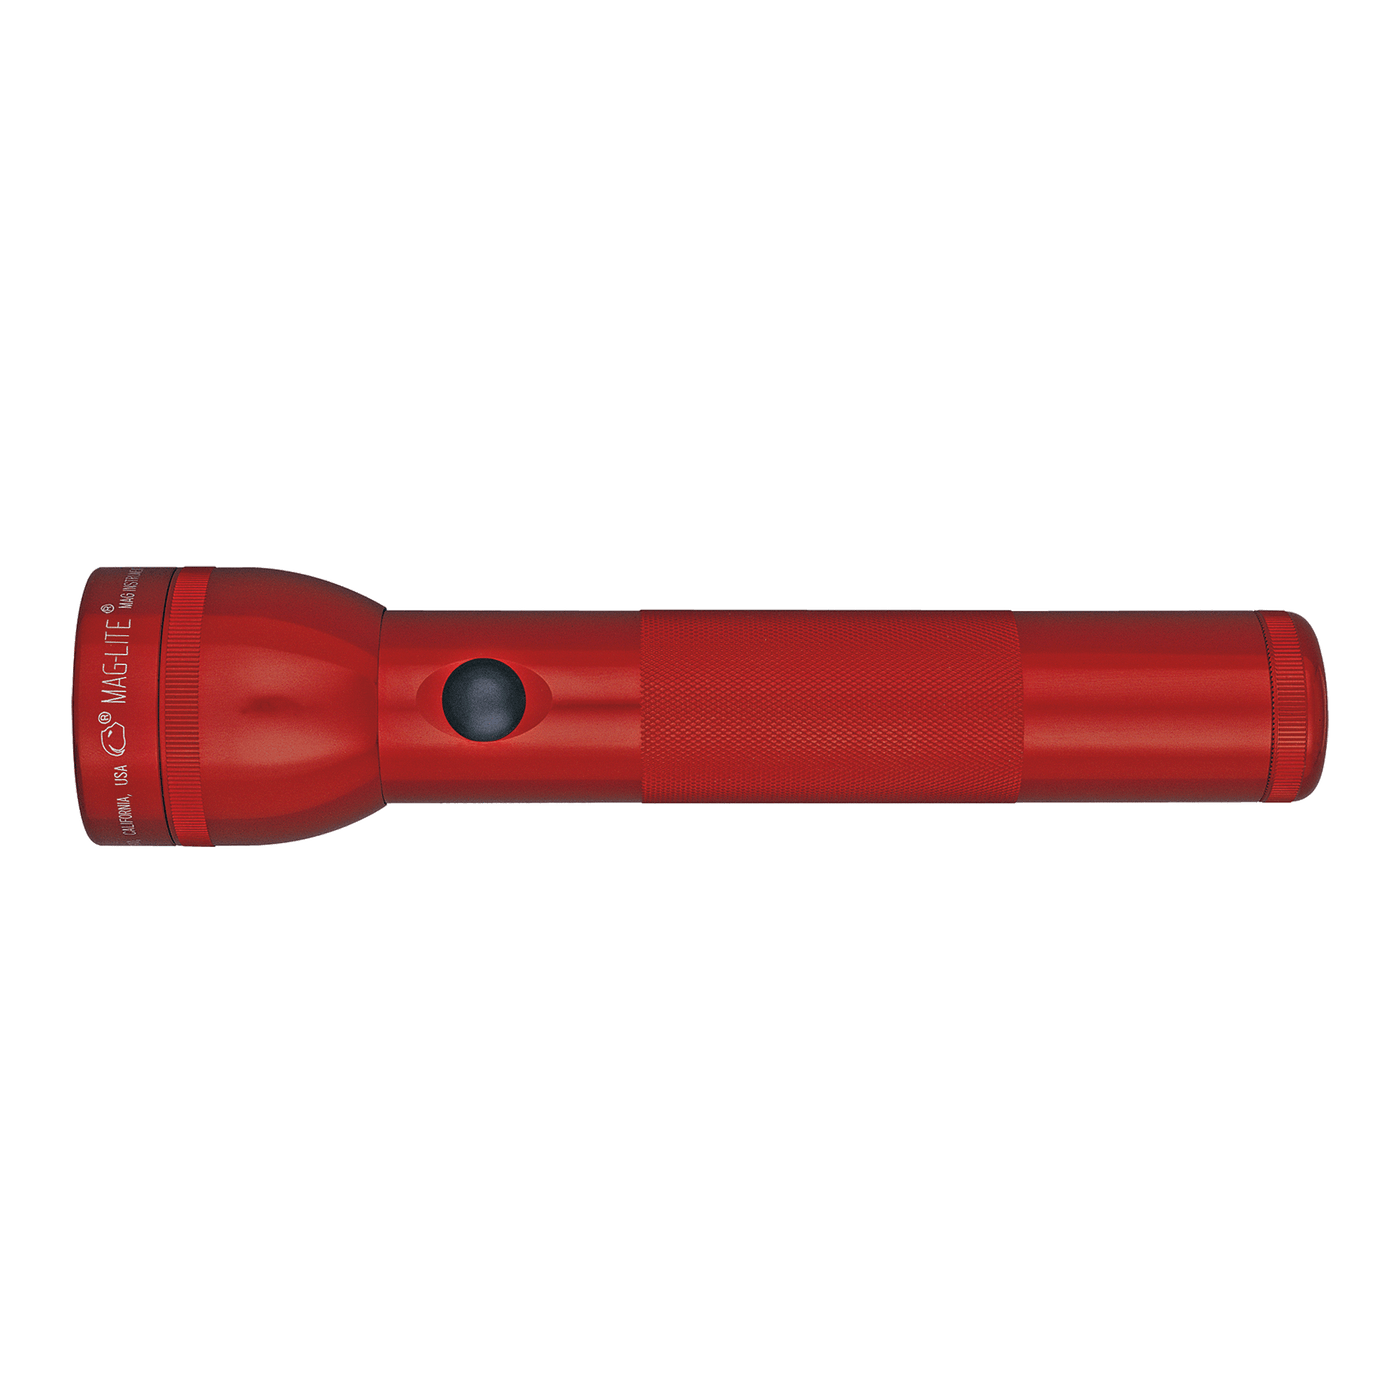 Maglite LED Flashlight 2-cell Red